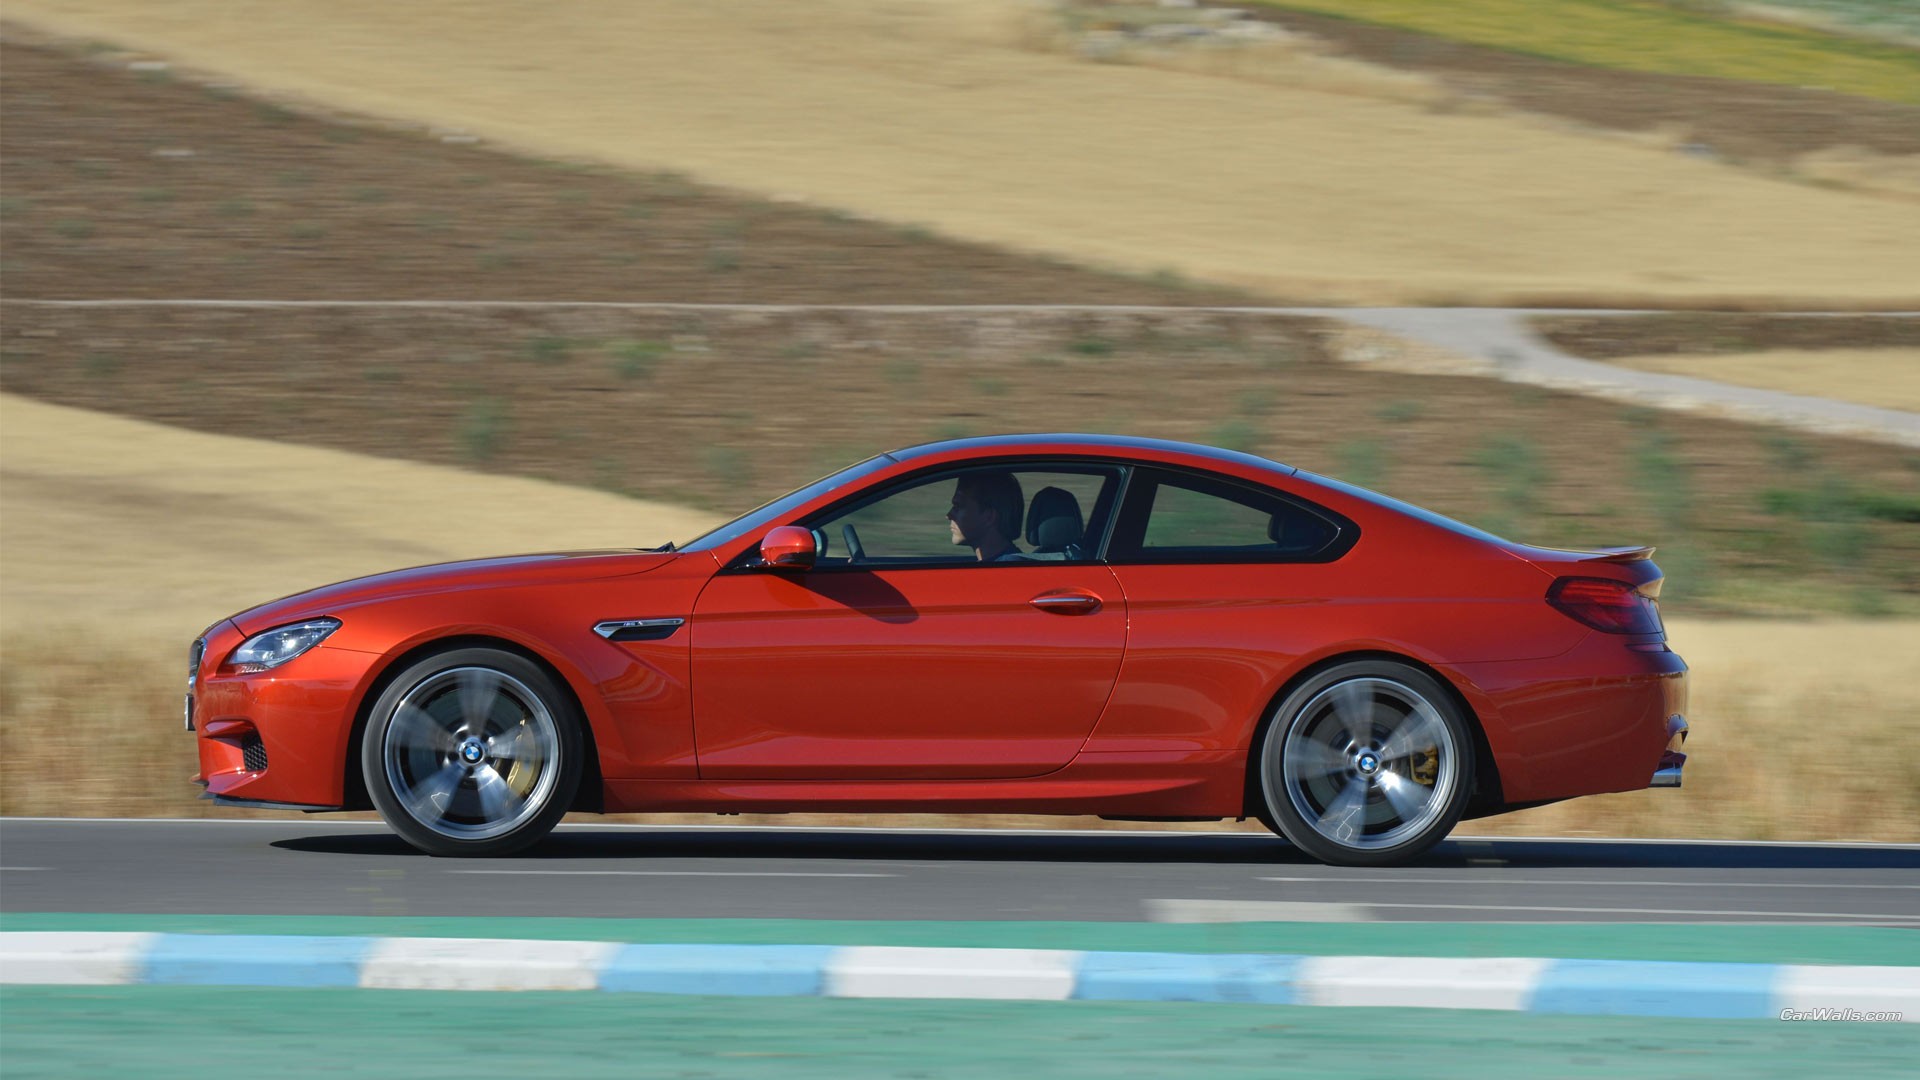 General 1920x1080 BMW M6 coupe red cars side view BMW 6 Series BMW F12/F13/F06 vehicle BMW car